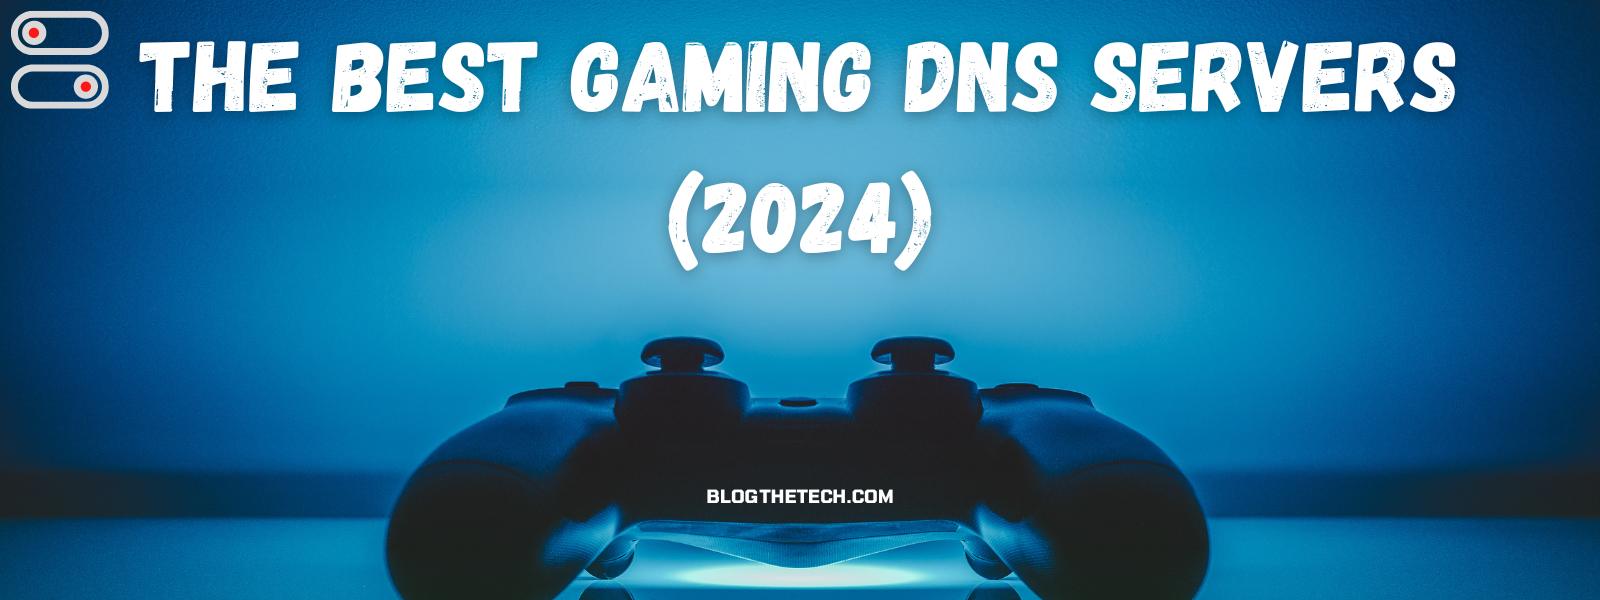 Best Gaming DNS Servers-featured